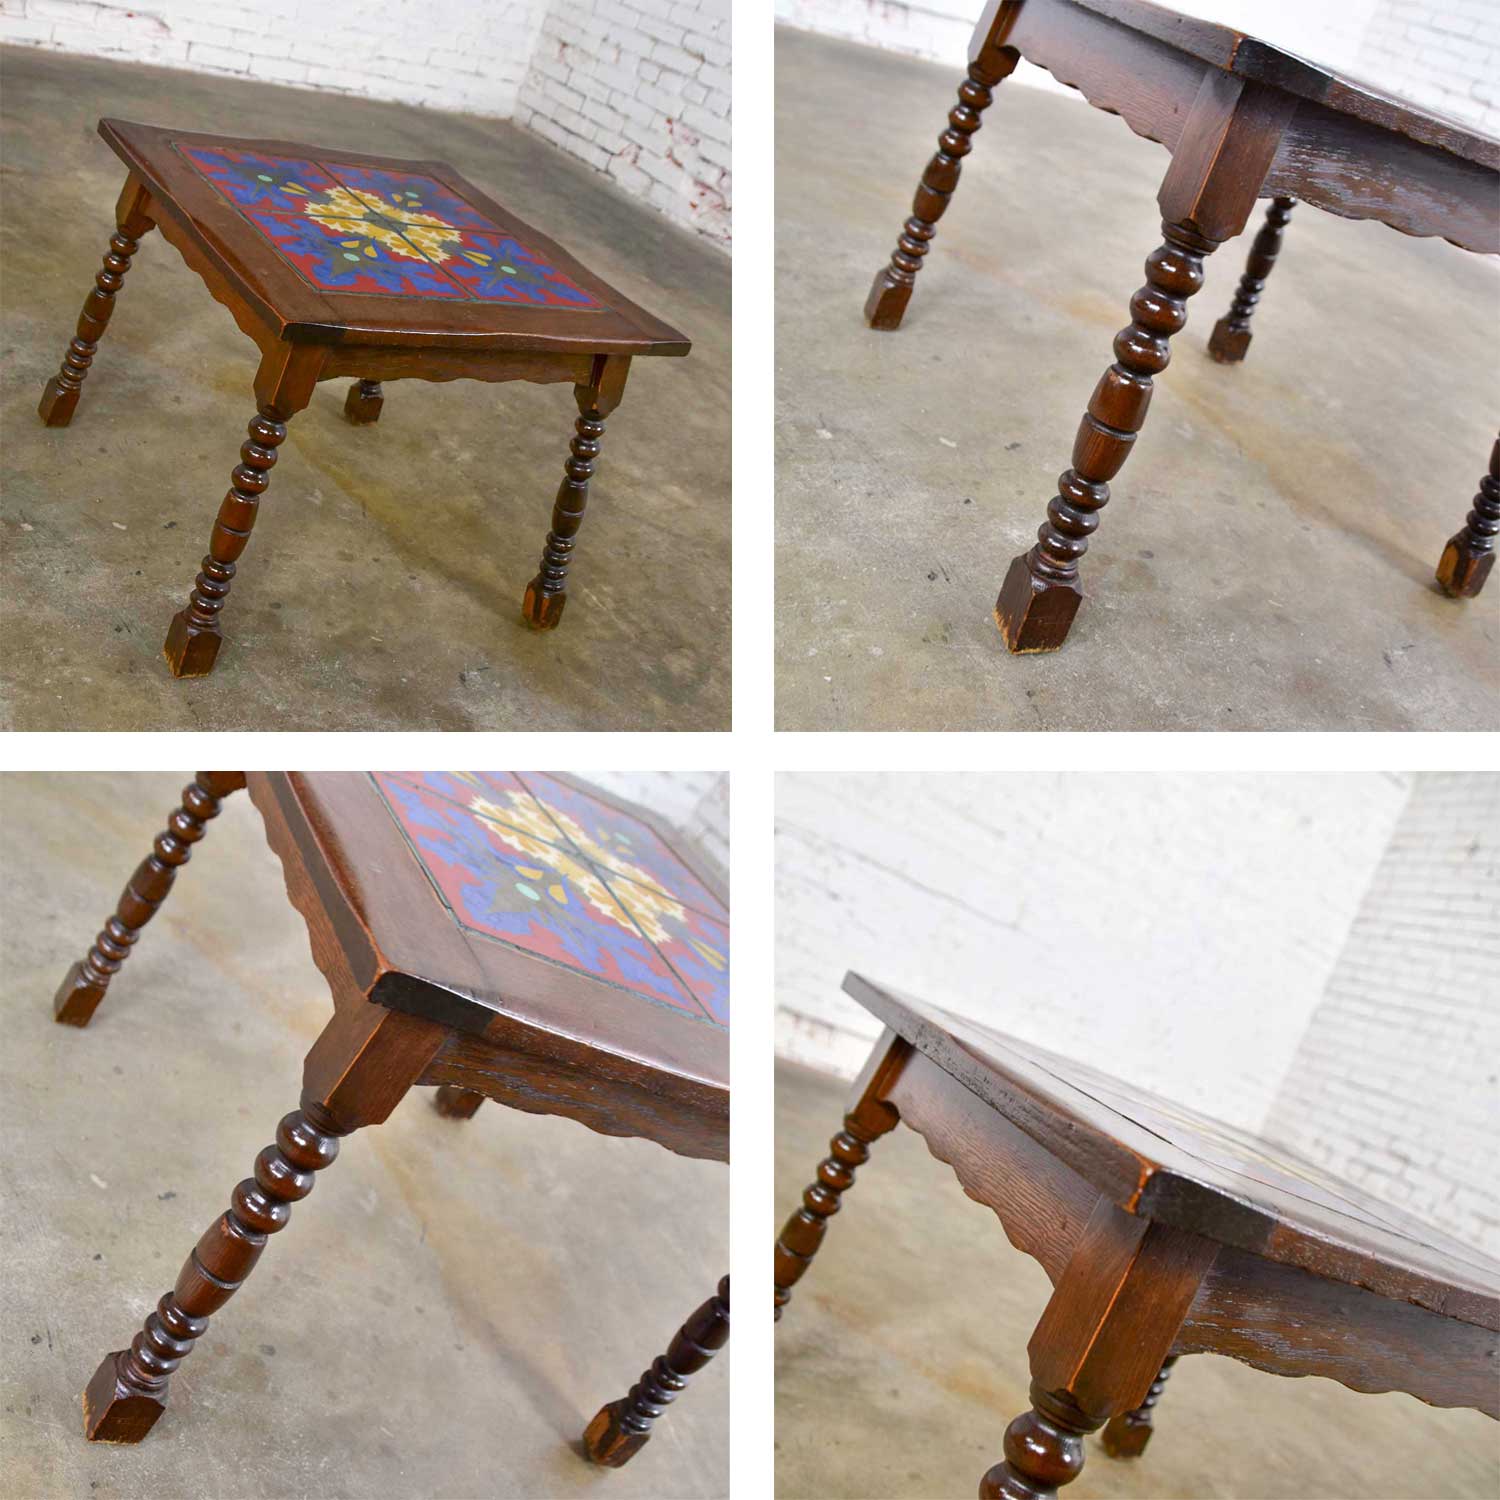 Catalina California Taylor or Mission Arts & Crafts Style Spanish Tile Top Side or End Table